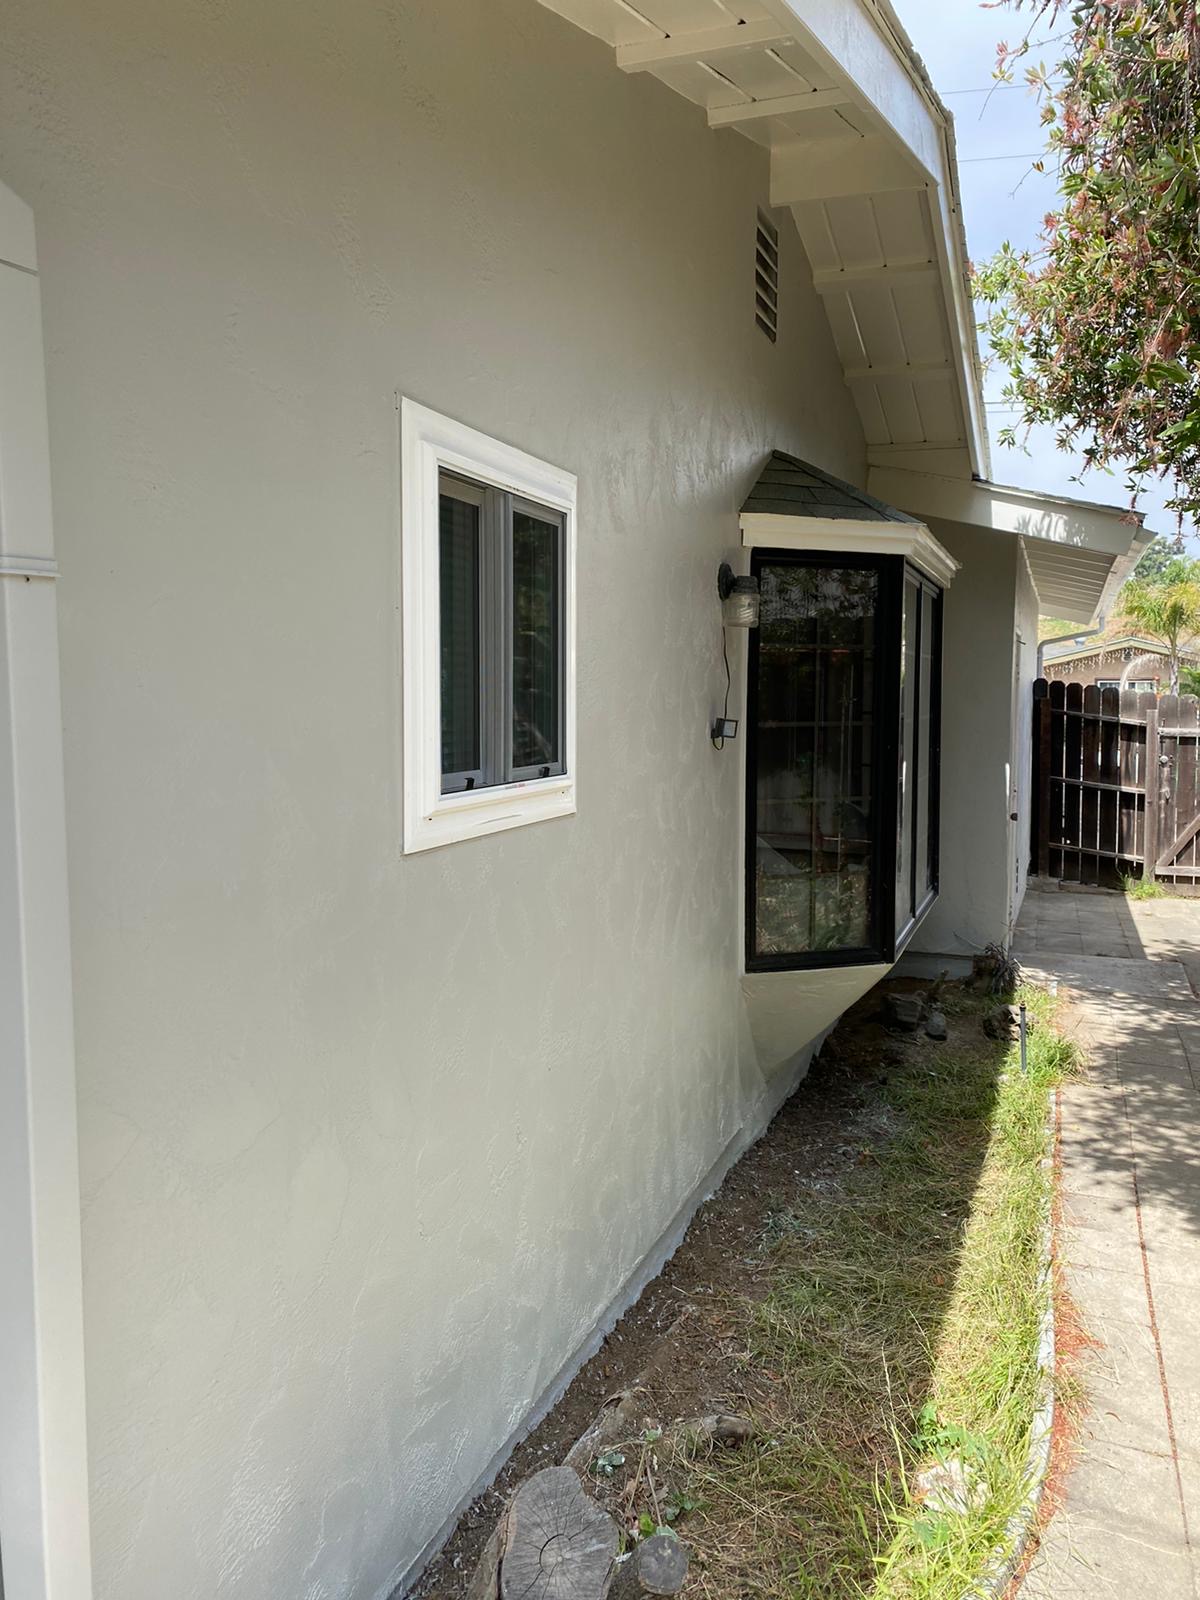 House Painting in Chula Vista 91911 2